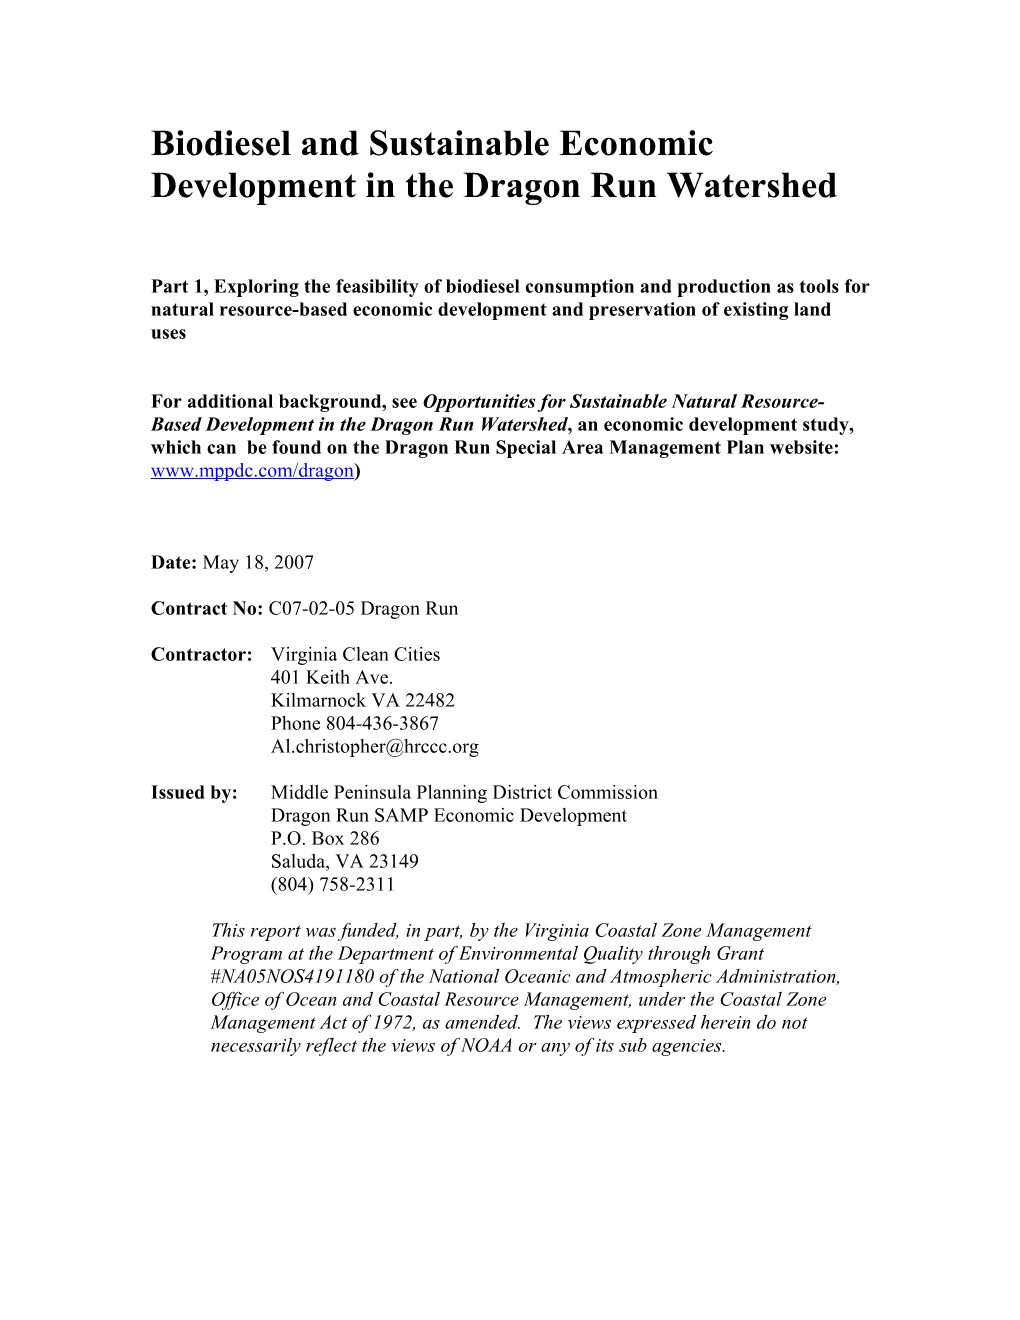 Characterize Fleets and Potential Retail Market for Biodiesel in Dragon Run Watershed